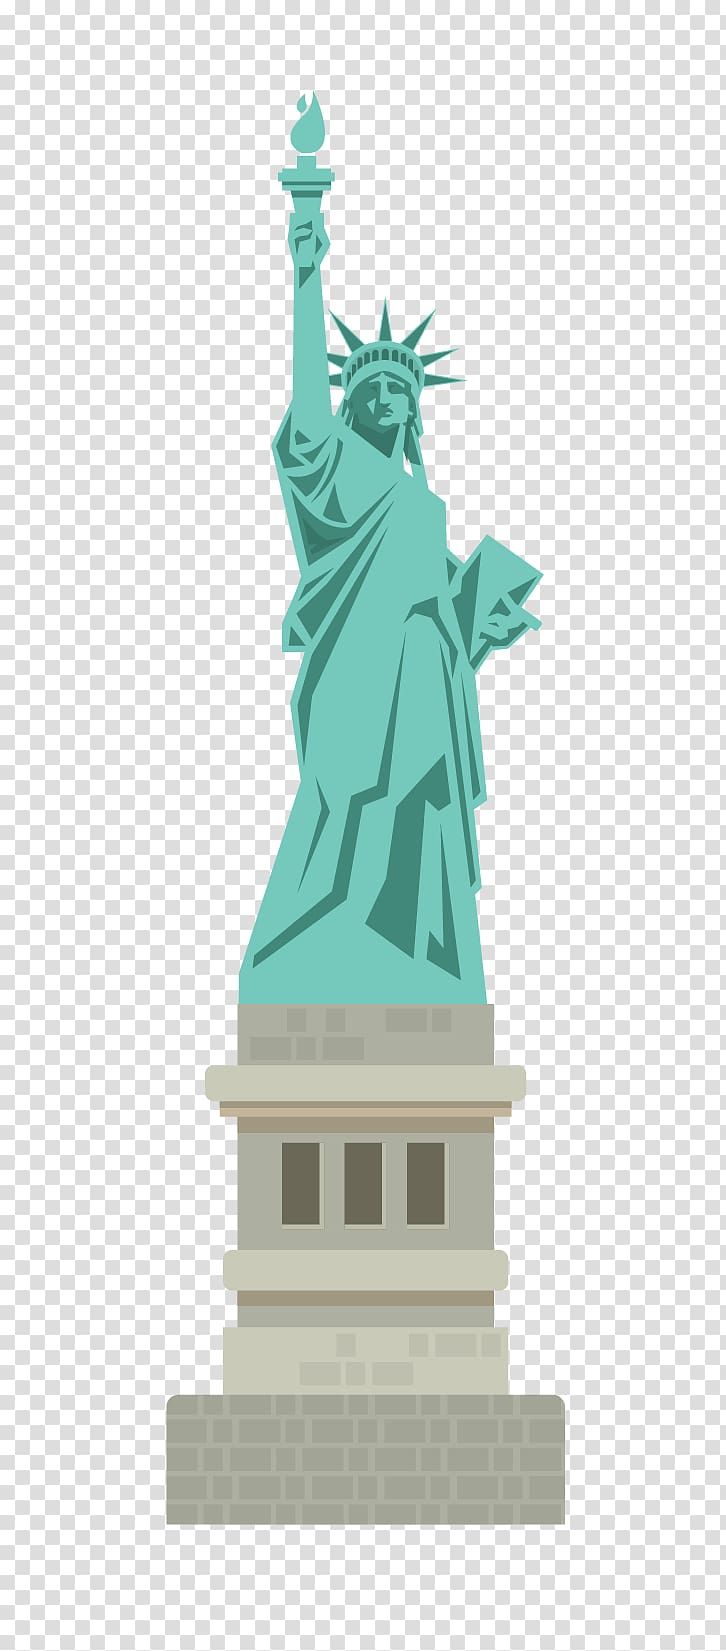 Statue of Liberty Subscriber identity module Prepay mobile phone LTE 4G, Statue of Liberty transparent background PNG clipart